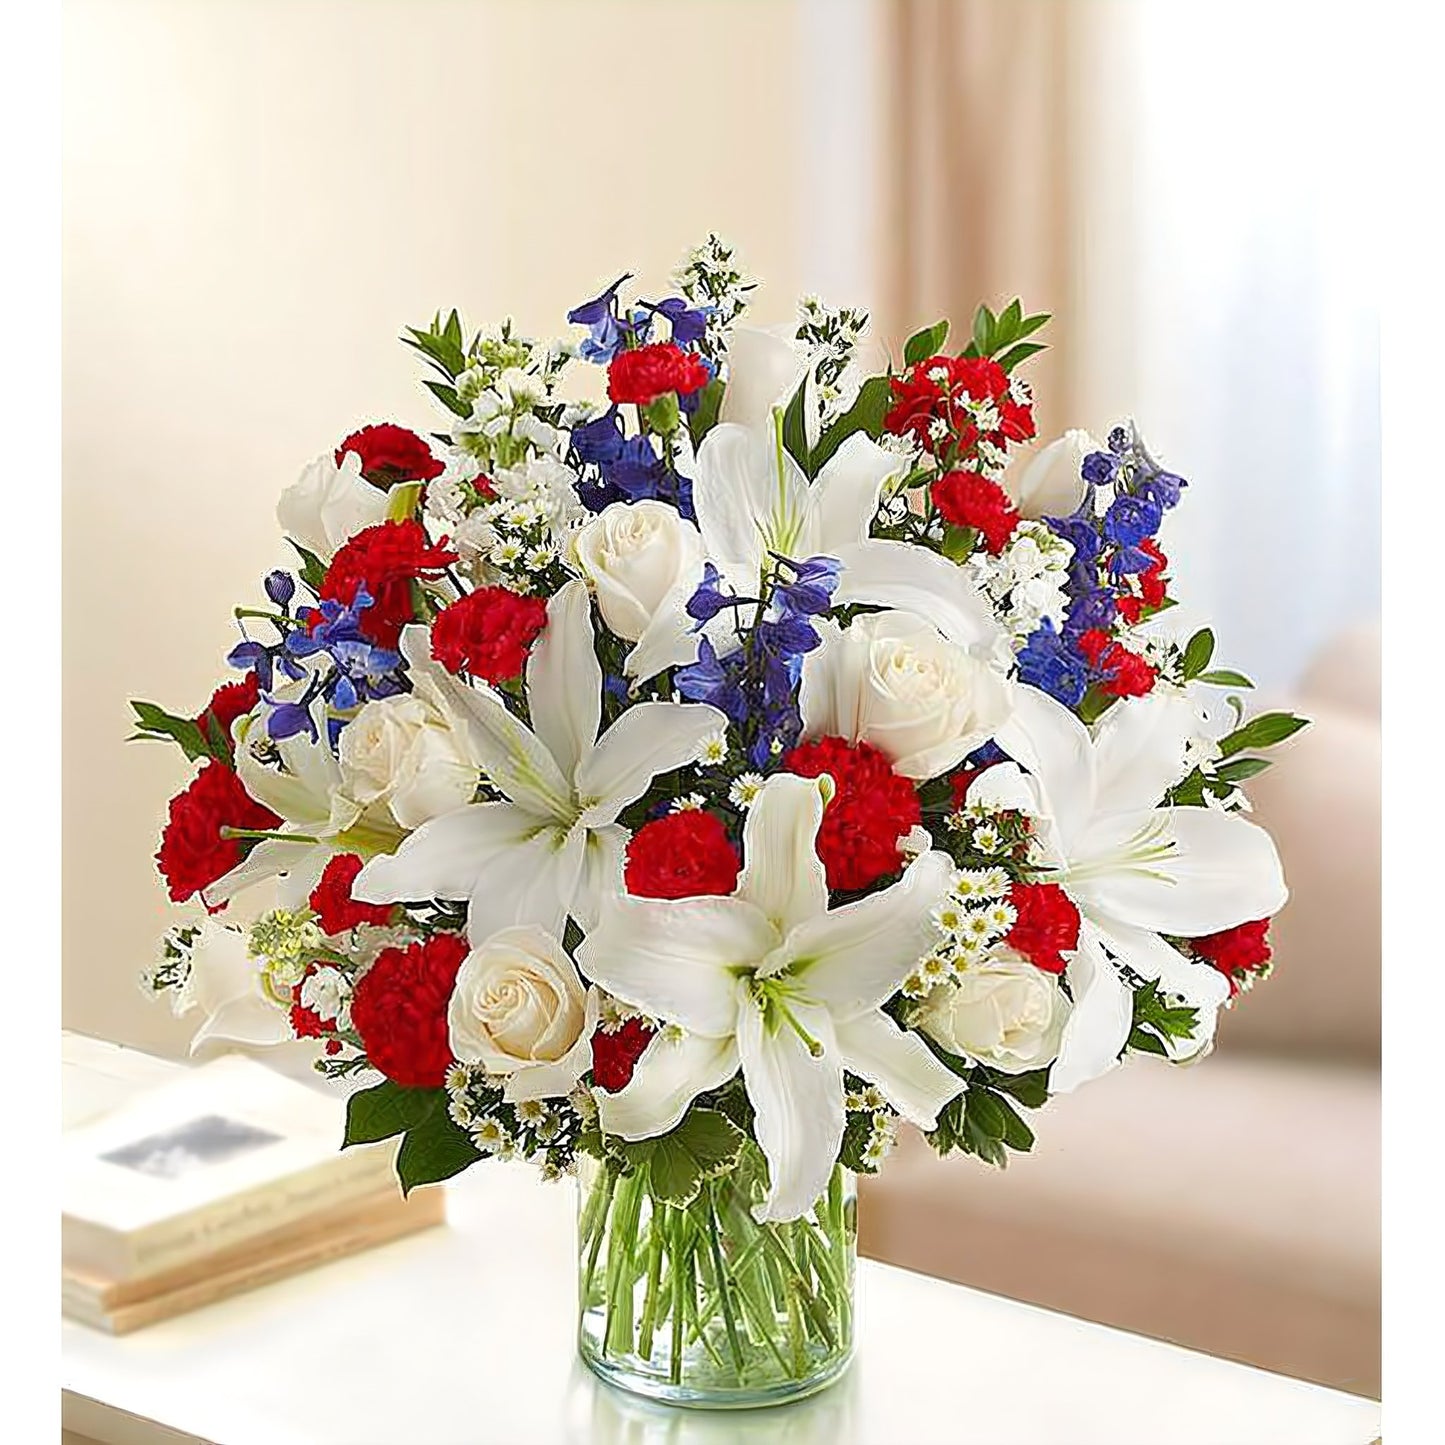 Sincerest Sorrow - Red, White and Blue - Floral Arrangement - Flower Delivery Brooklyn